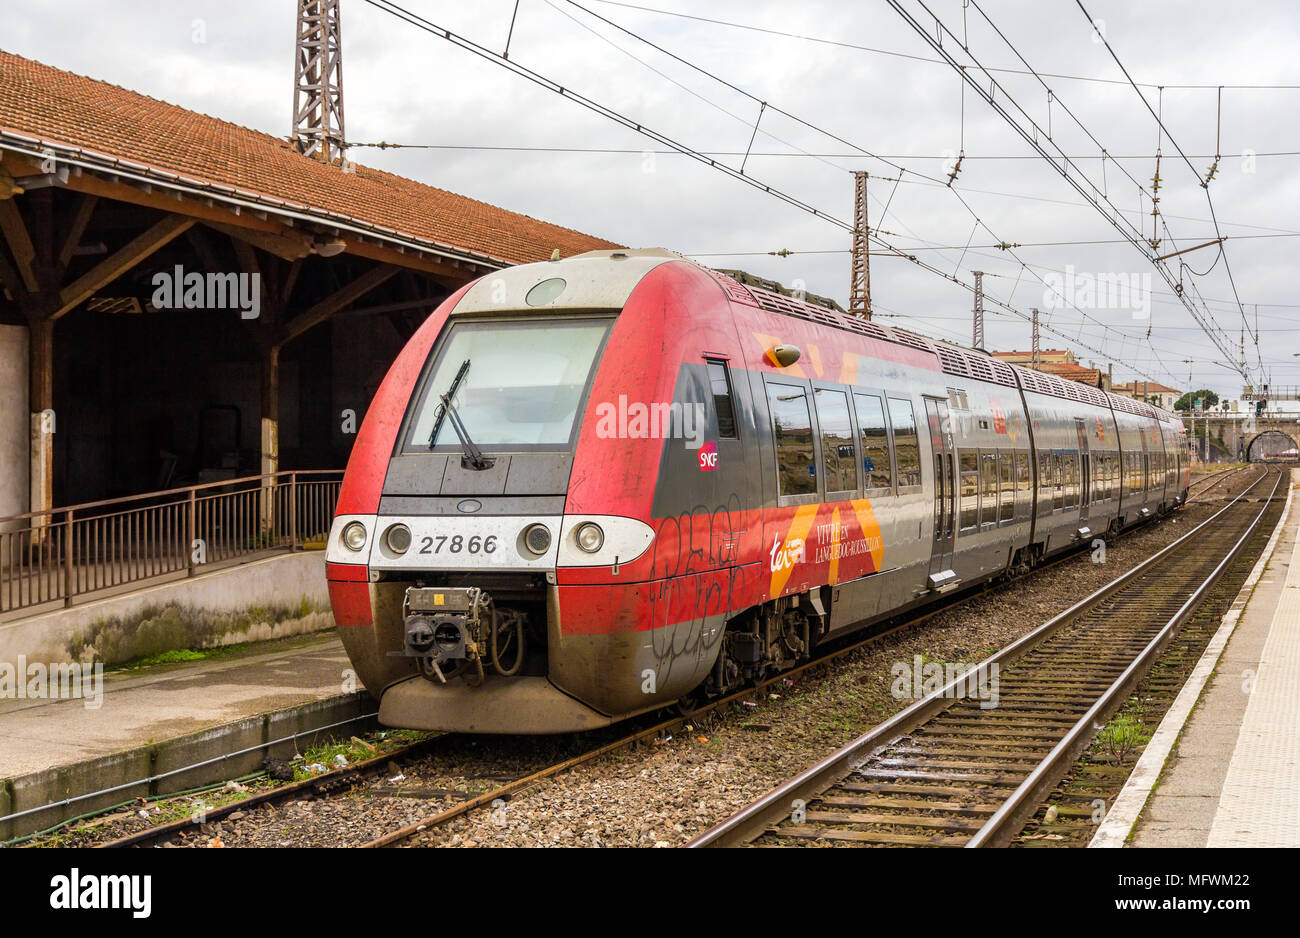 NARBONNE, FRANCE - JANUARY 06: Regional electric train at Narbon Stock Photo